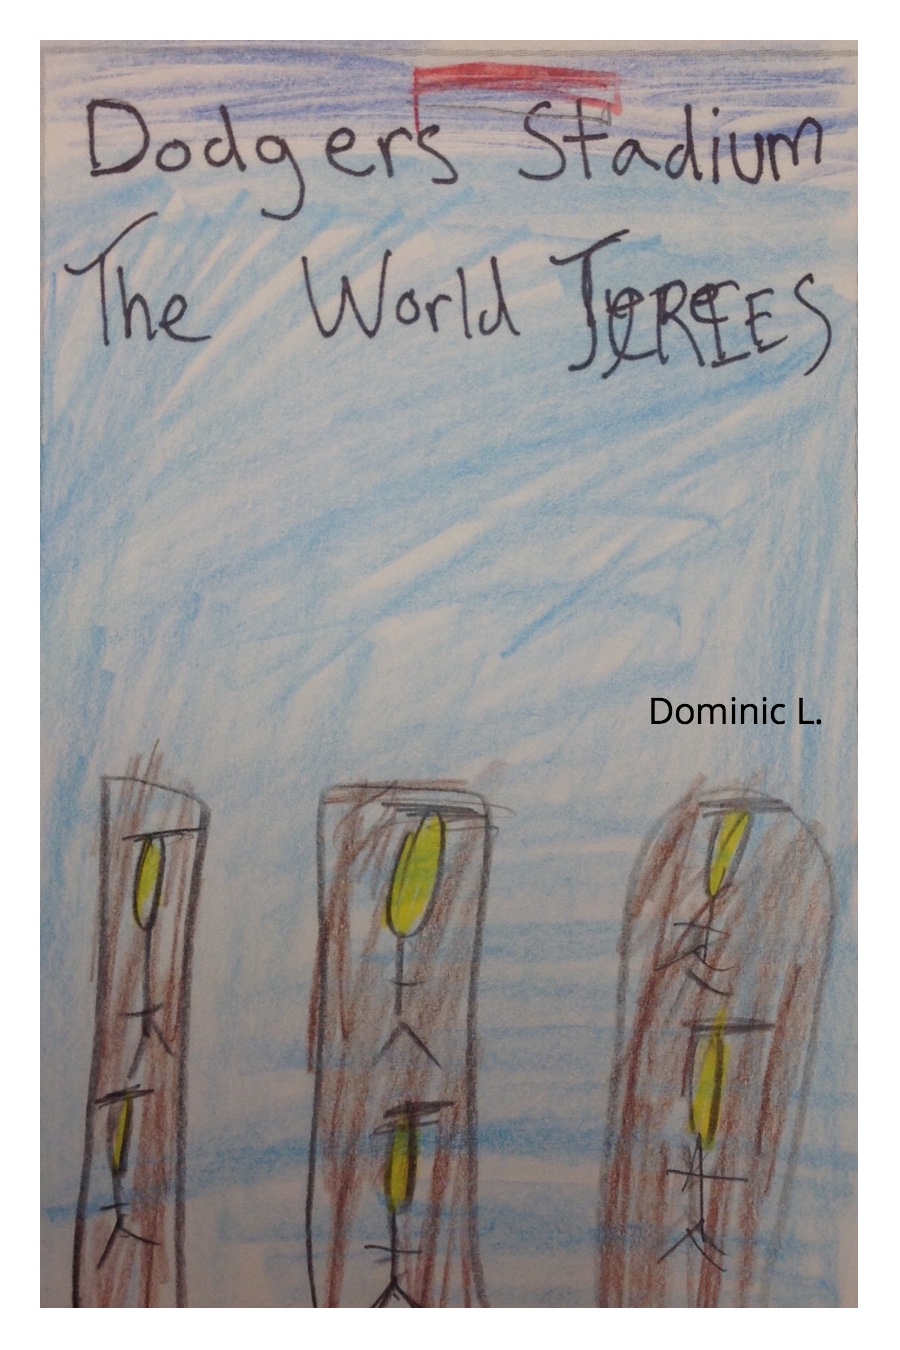 The World Series by Dominic L